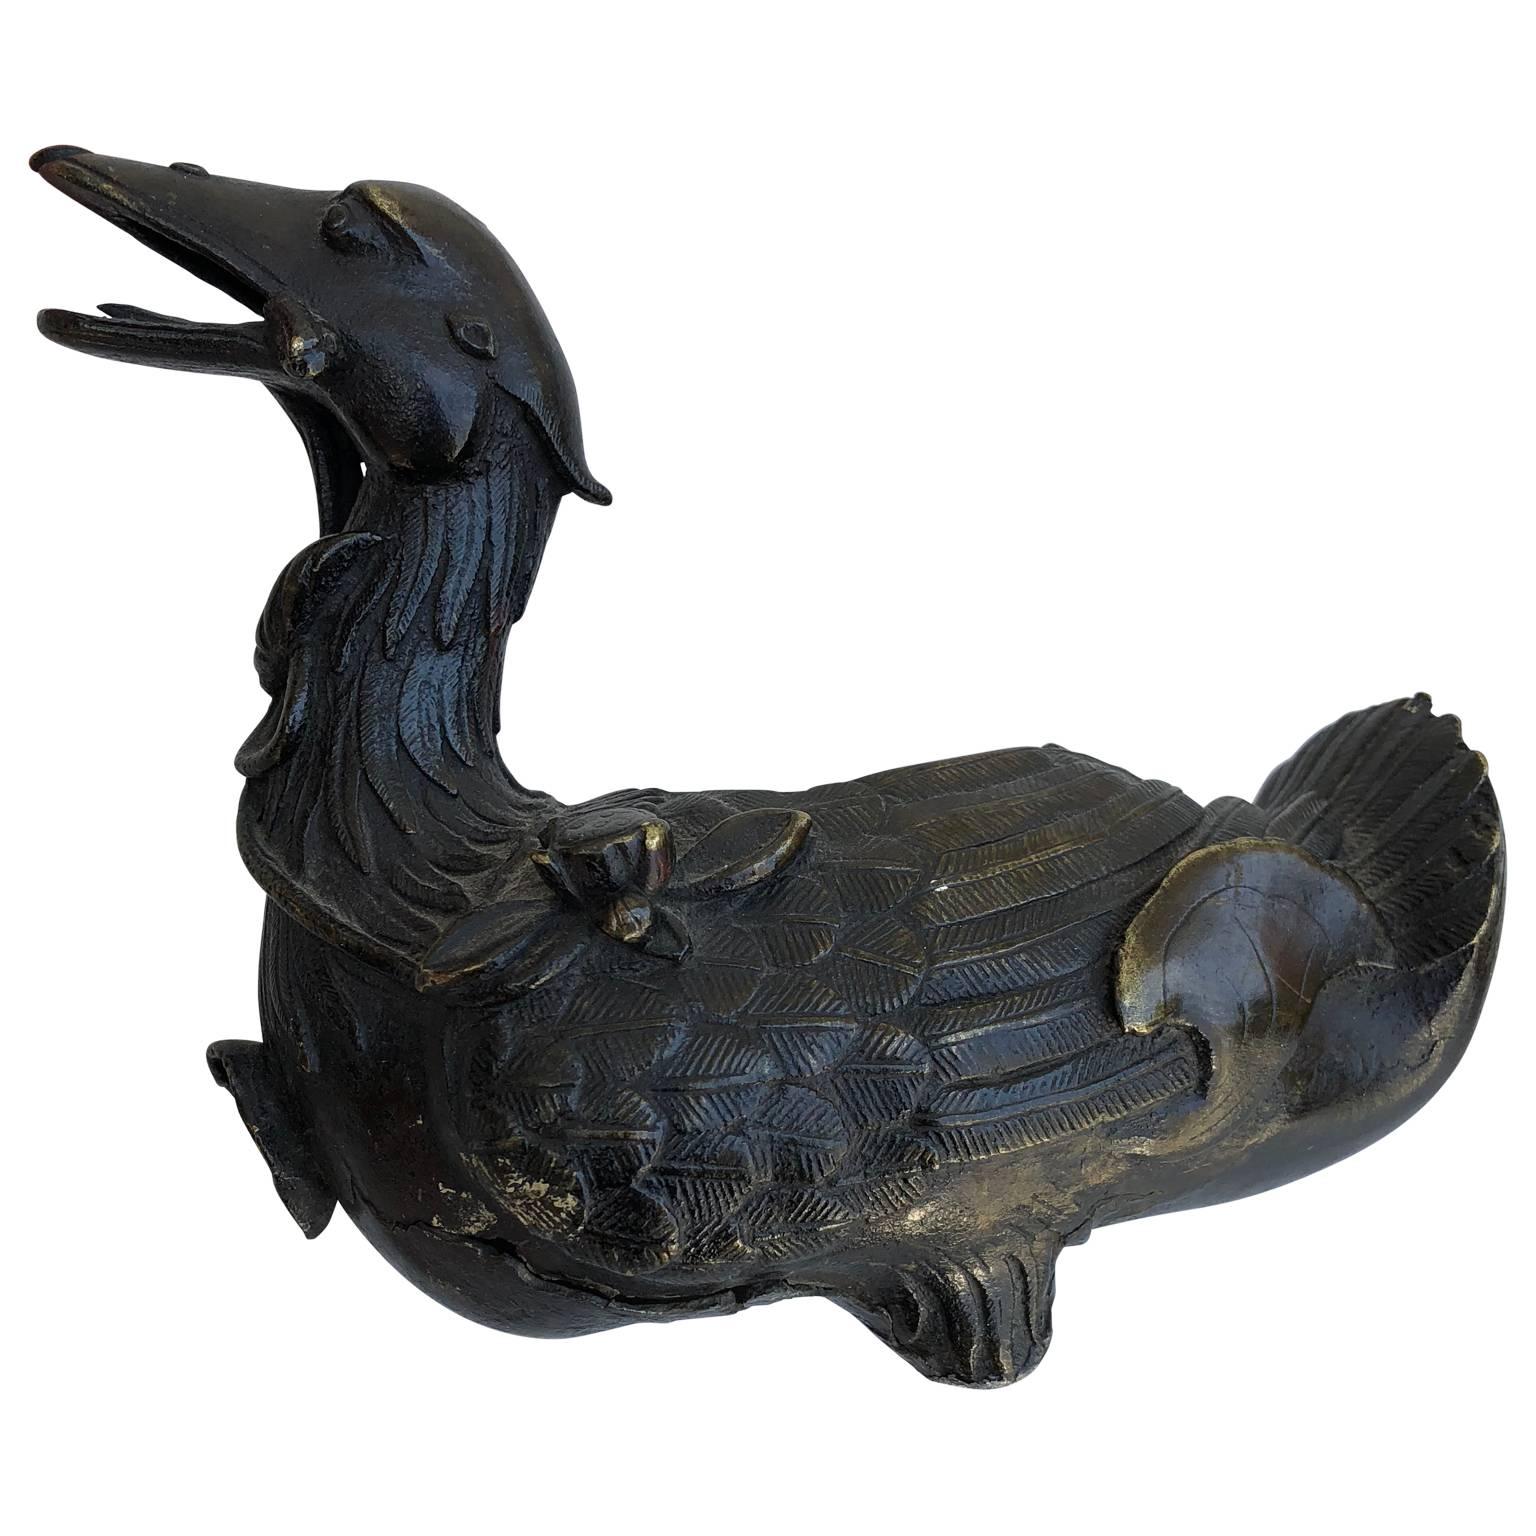 18th century Chinese bronze duck incense burner, Qing period
Please note that one foot is missing, broken off, see detailed image.

 